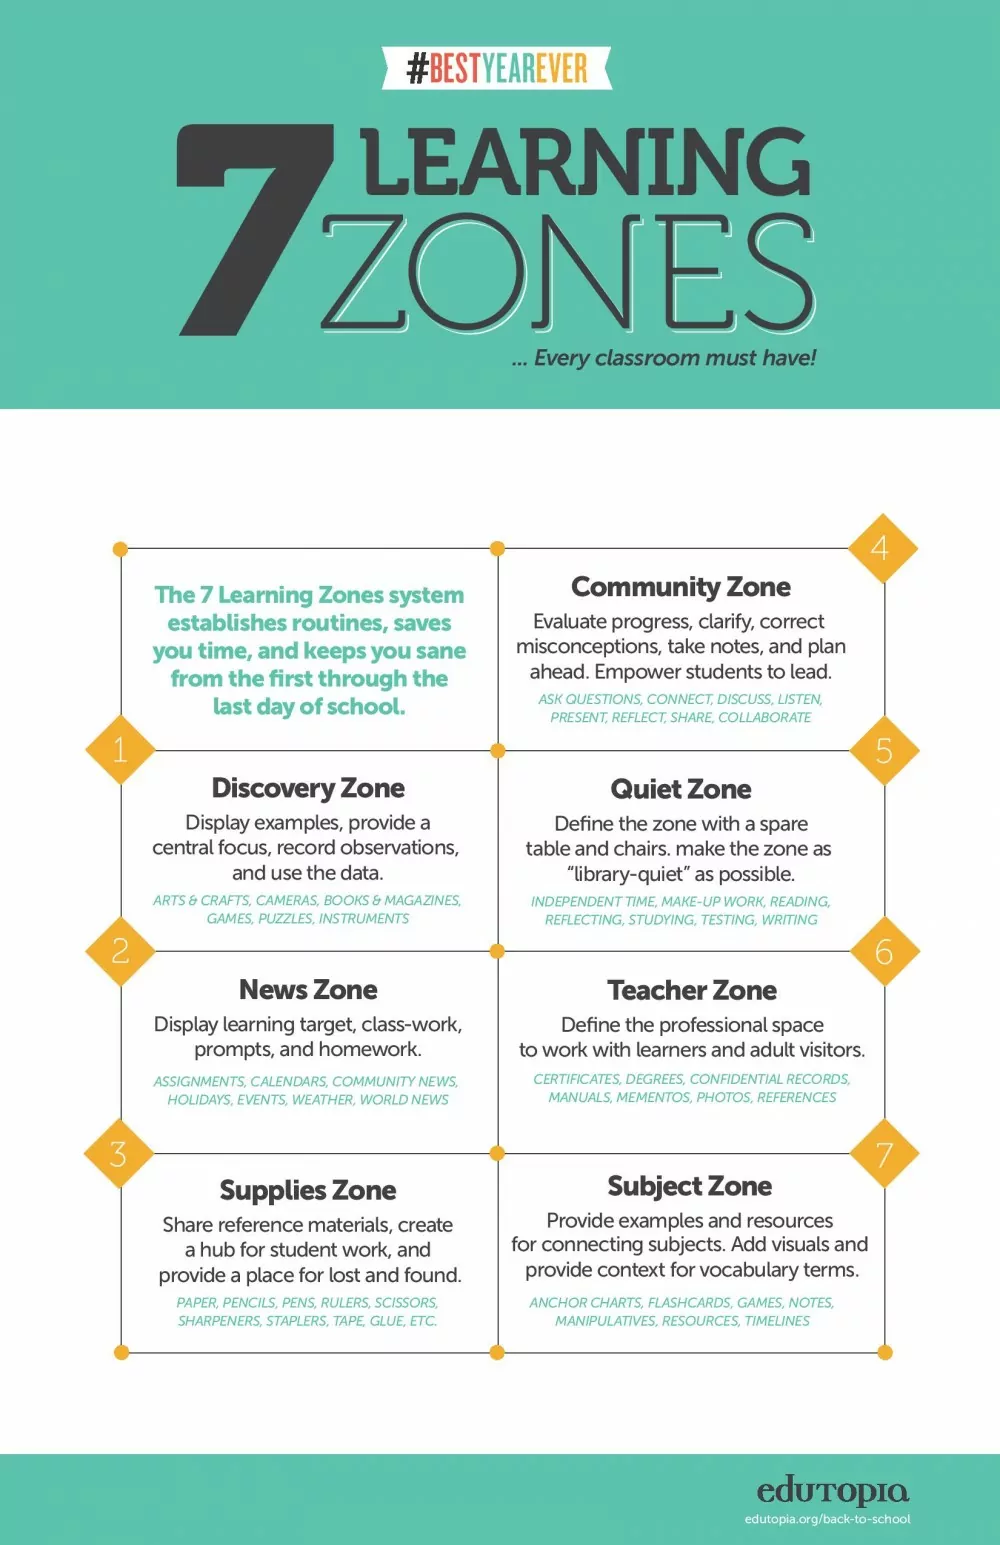 7 Learning zones